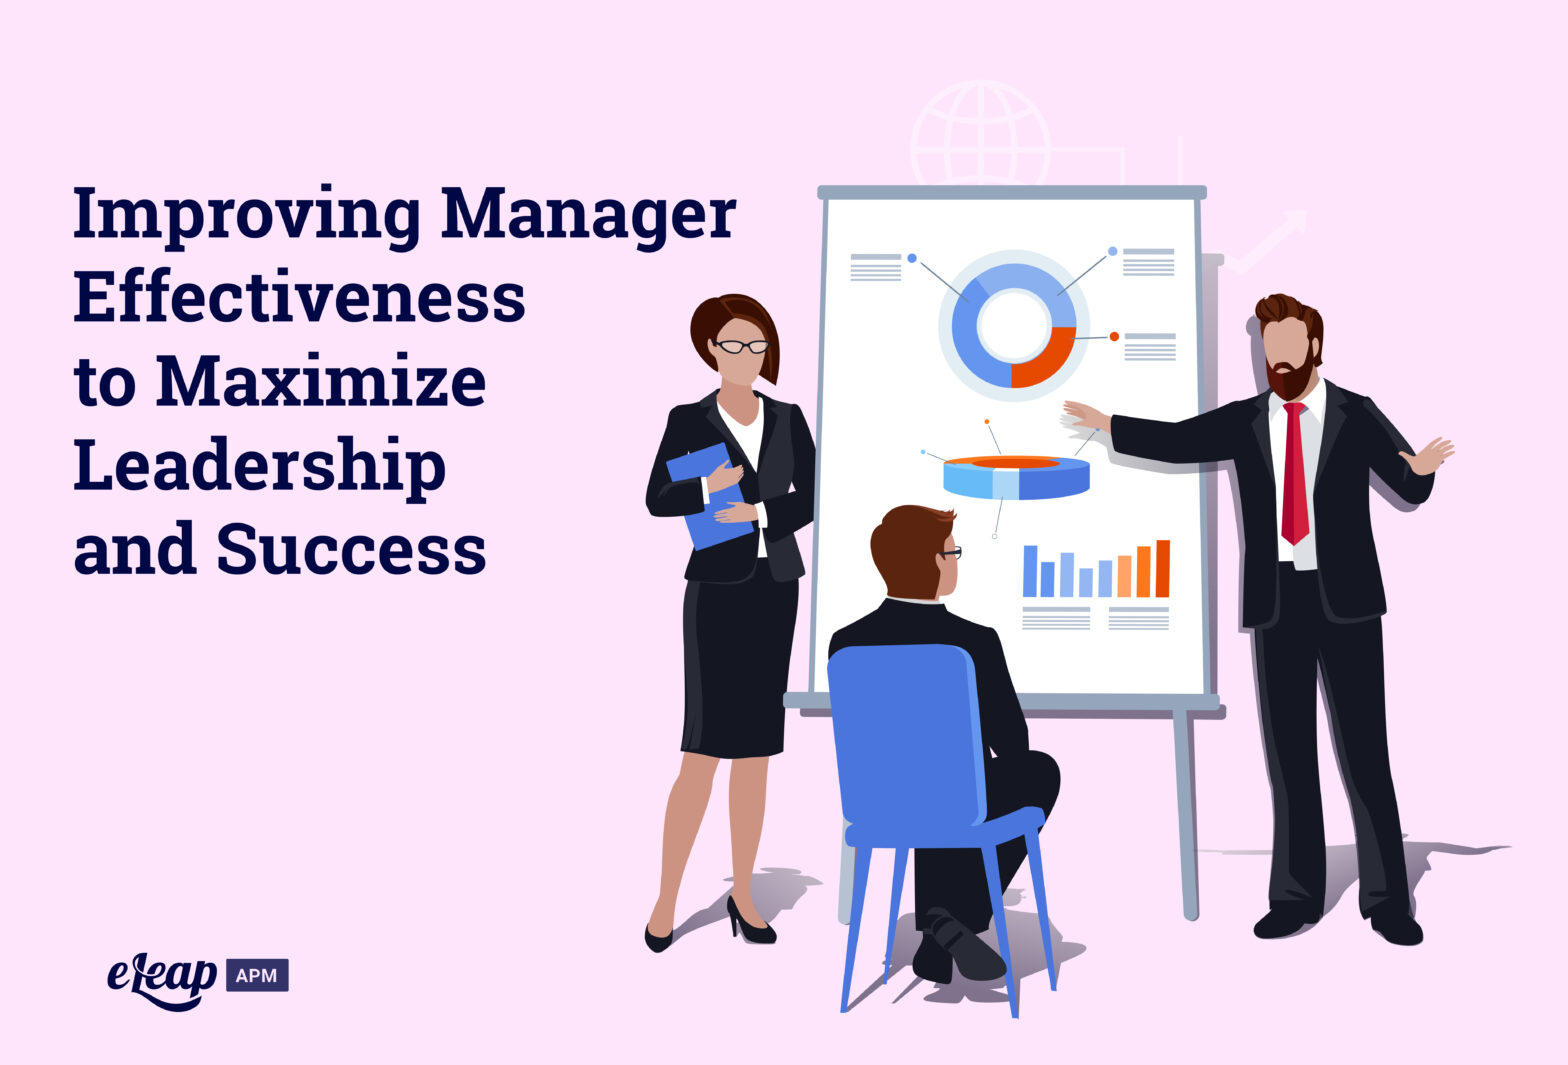 Improving Manager Effectiveness to Maximize Leadership and Success